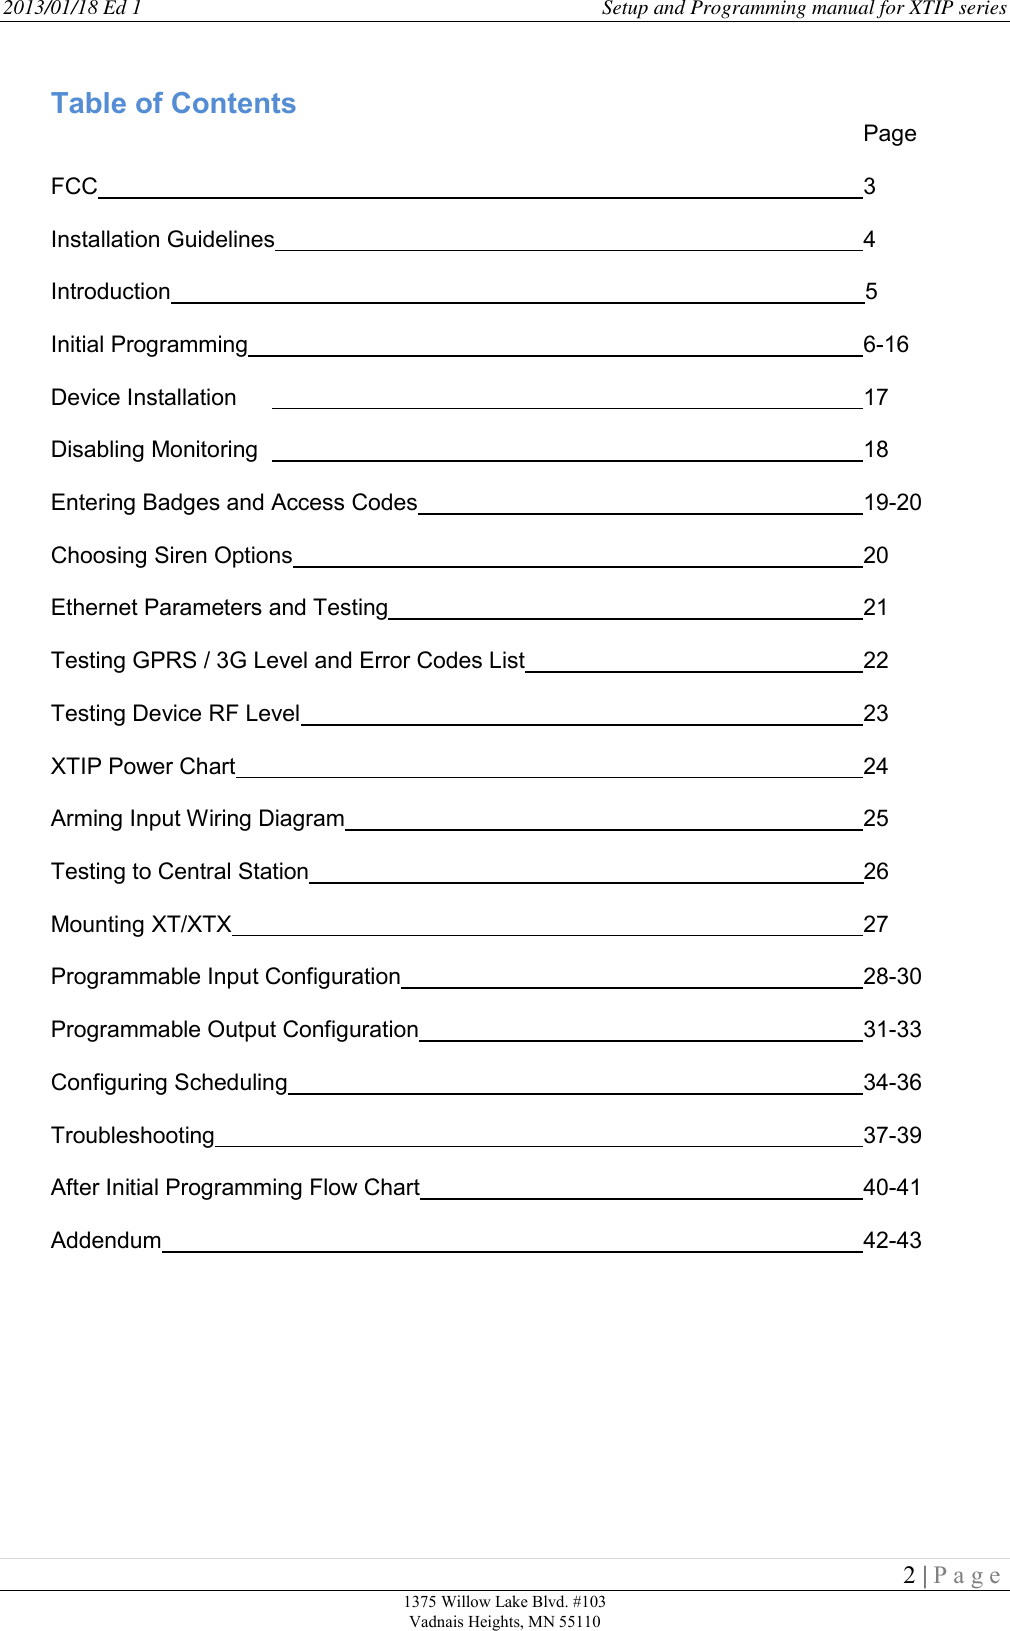 2013/01/18 Ed 1    Setup and Programming manual for XTIP series   2 | P a g e  1375 Willow Lake Blvd. #103 Vadnais Heights, MN 55110                                                      Table of Contents                       Page  FCC                                  3  Installation Guidelines                4  Introduction                                                                                                             5  Initial Programming                  6-16  Device Installation                  17  Disabling Monitoring                  18   Entering Badges and Access Codes             19-20  Choosing Siren Options                20  Ethernet Parameters and Testing              21  Testing GPRS / 3G Level and Error Codes List          22  Testing Device RF Level                23  XTIP Power Chart                  24  Arming Input Wiring Diagram               25  Testing to Central Station                                                                                       26  Mounting XT/XTX                  27  Programmable Input Configuration              28-30  Programmable Output Configuration             31-33  Configuring Scheduling                34-36  Troubleshooting                  37-39  After Initial Programming Flow Chart            40-41  Addendum                    42-43       